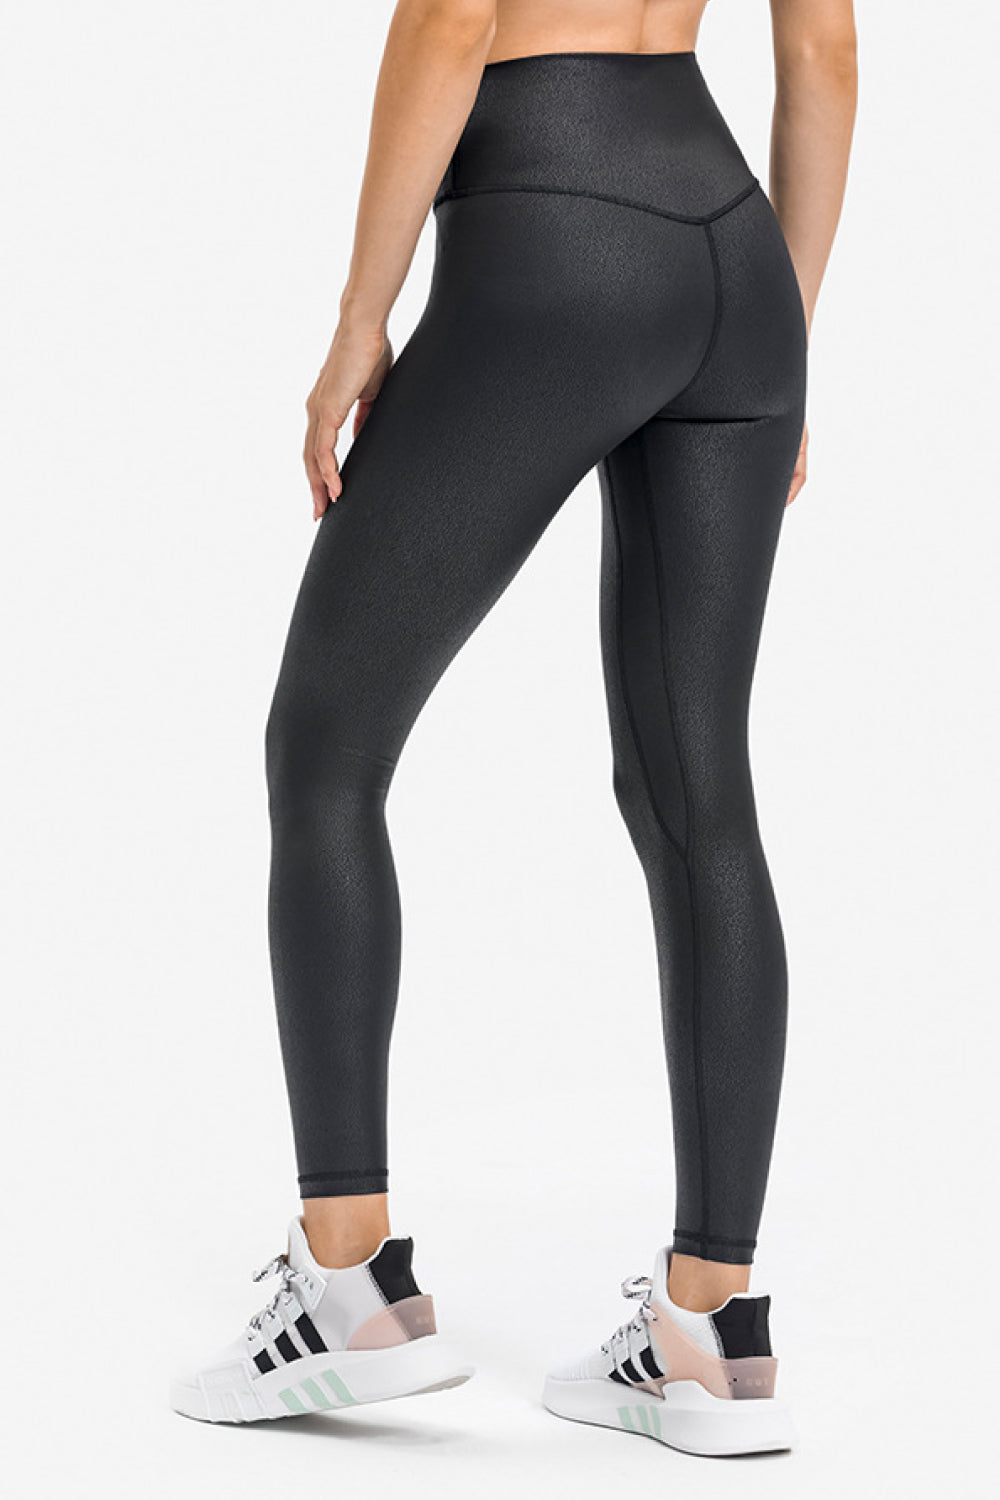 Invisible Pocket Sports Leggings Invisible Pocket Sports Leggings - M&R CORNERActivewear M&R CORNER